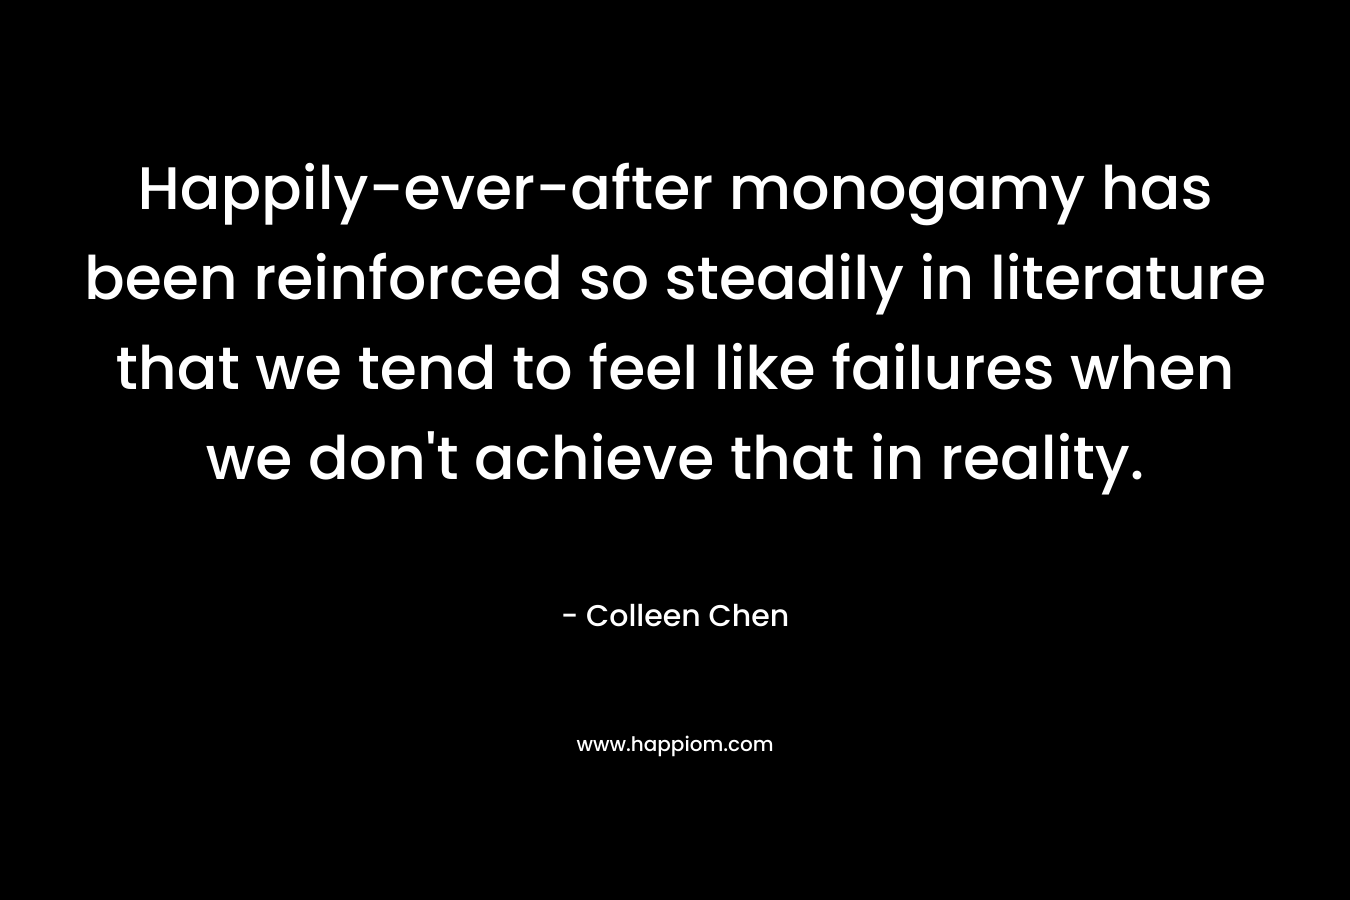 Happily-ever-after monogamy has been reinforced so steadily in literature that we tend to feel like failures when we don’t achieve that in reality. – Colleen Chen